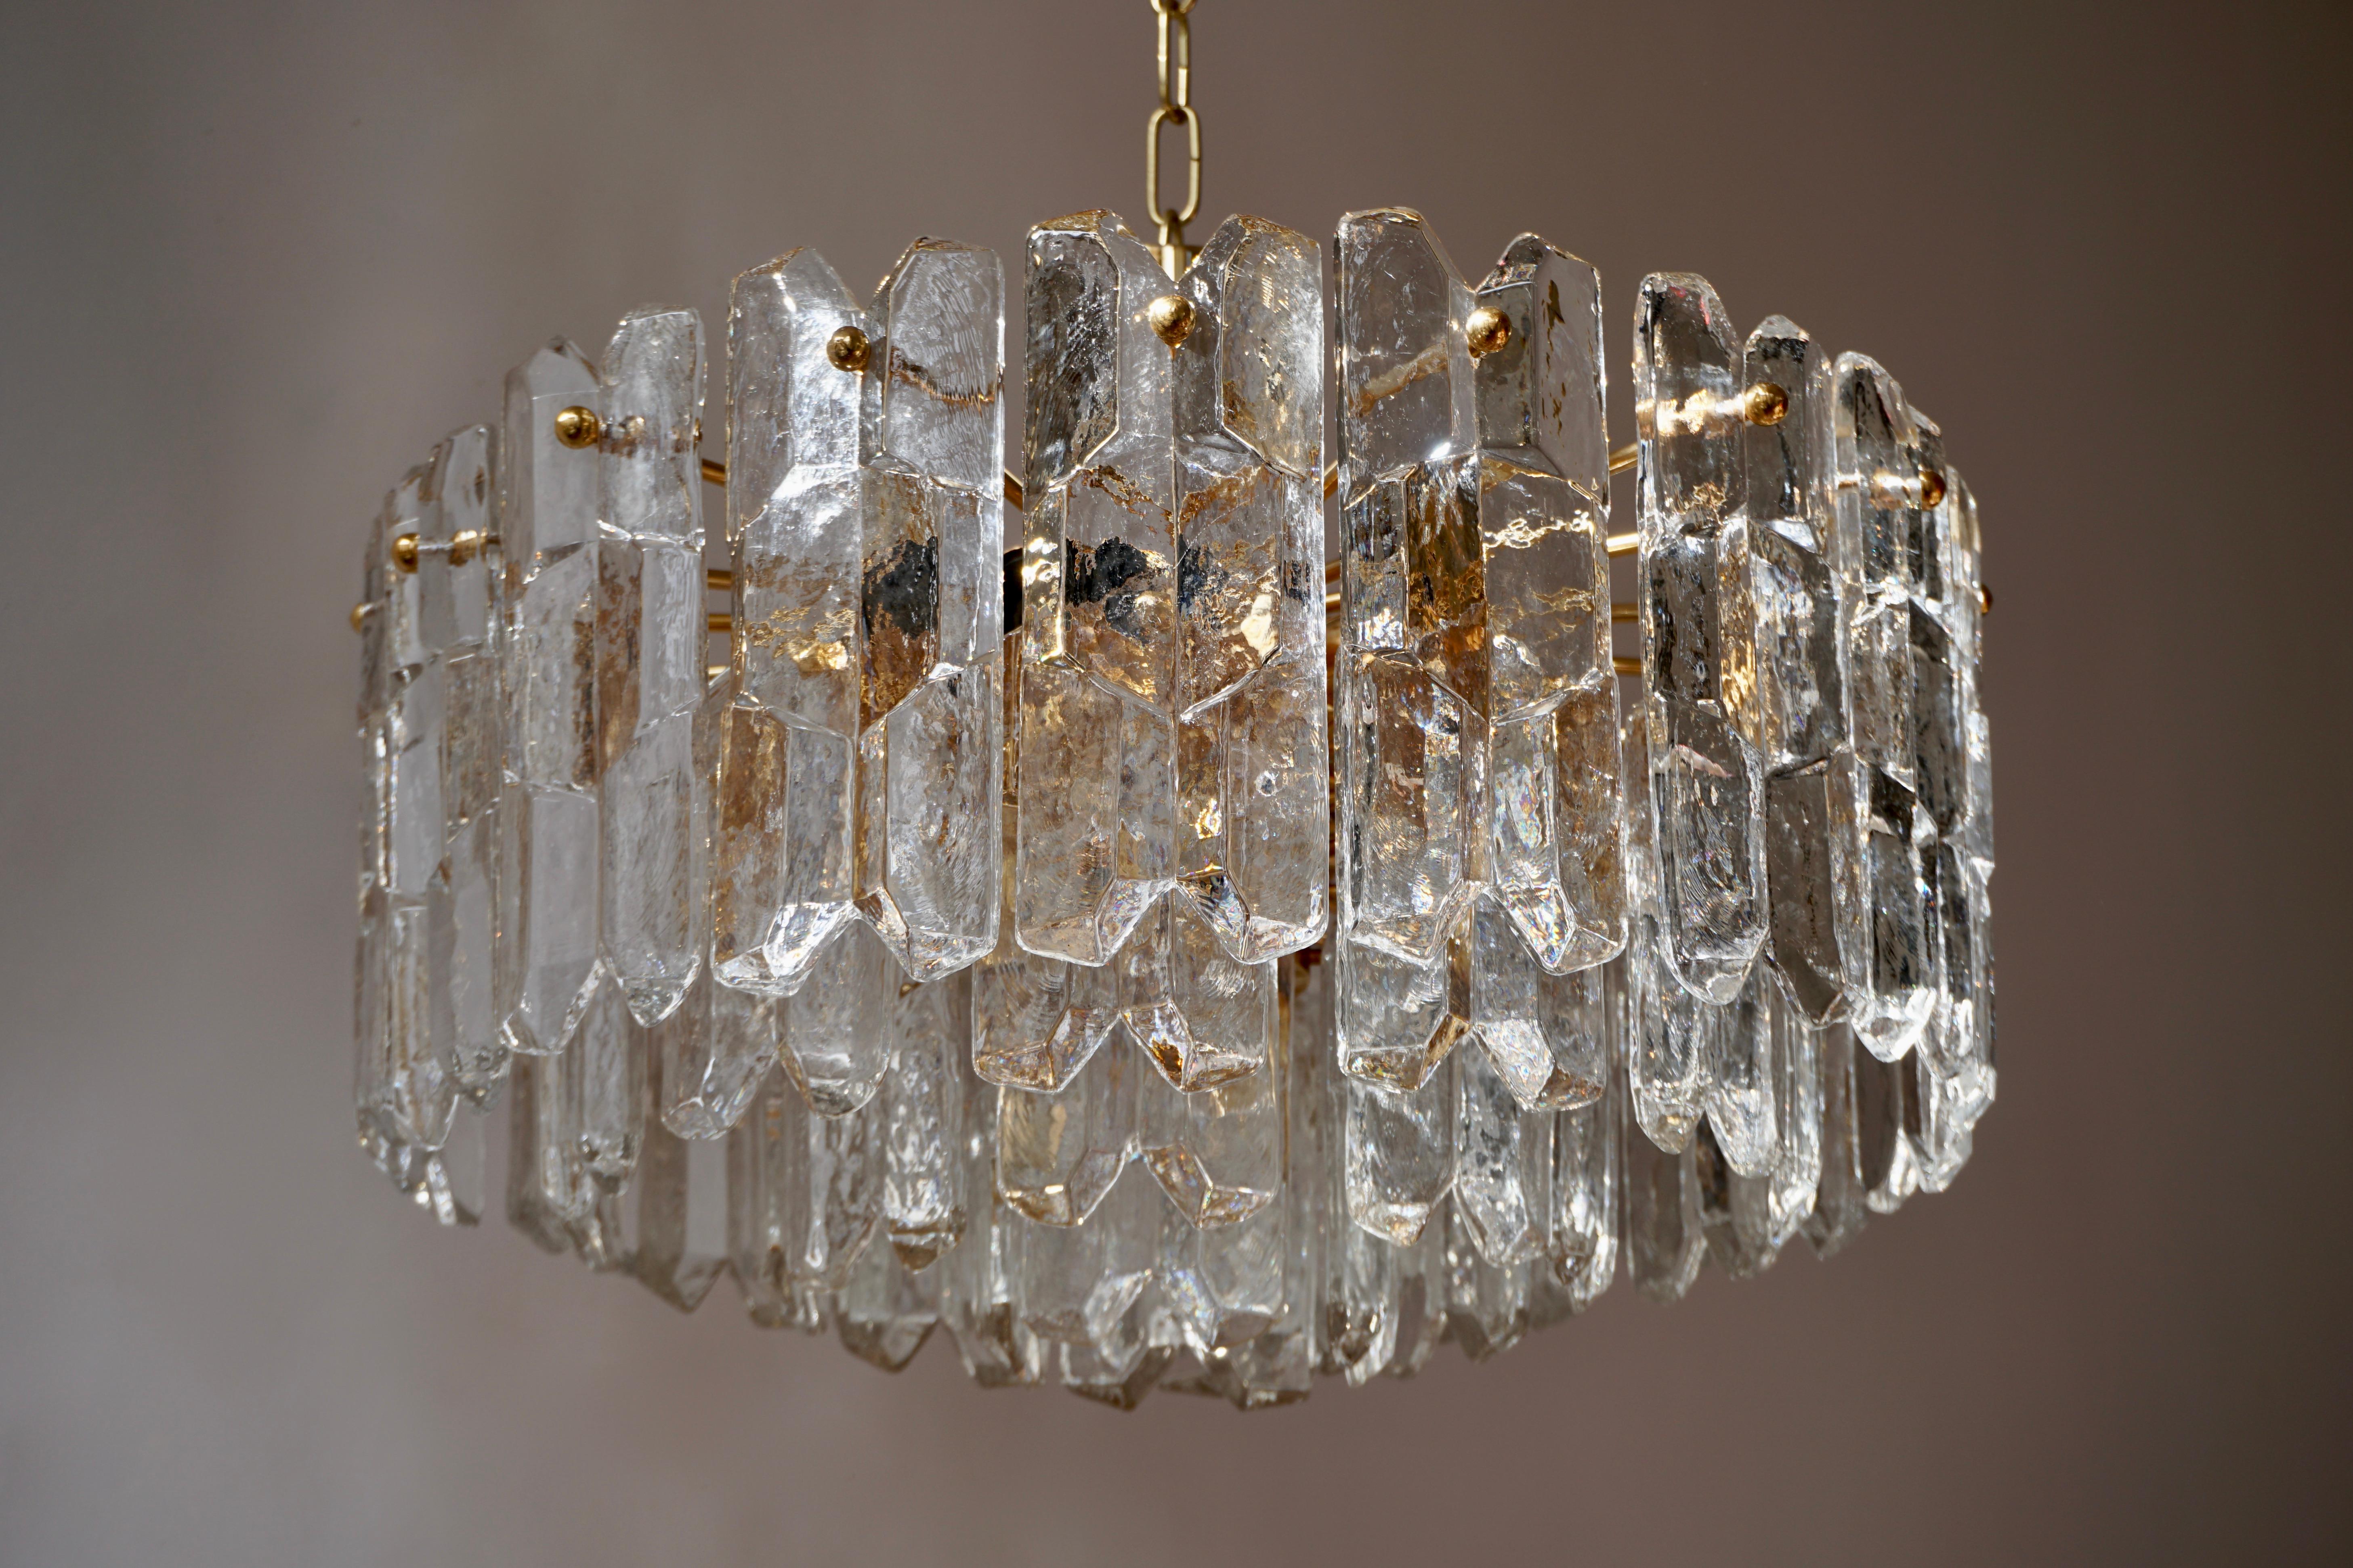 One very exquisit 24-carat gold-plated brass and clear brillant glass light fixture by J.T. Kalmar, Vienna, Austria, manufactured in midcentury, circa 1970 (late 1960s and early 1970s). 

The model name is 'Palazzo'. The lamps are marked with a